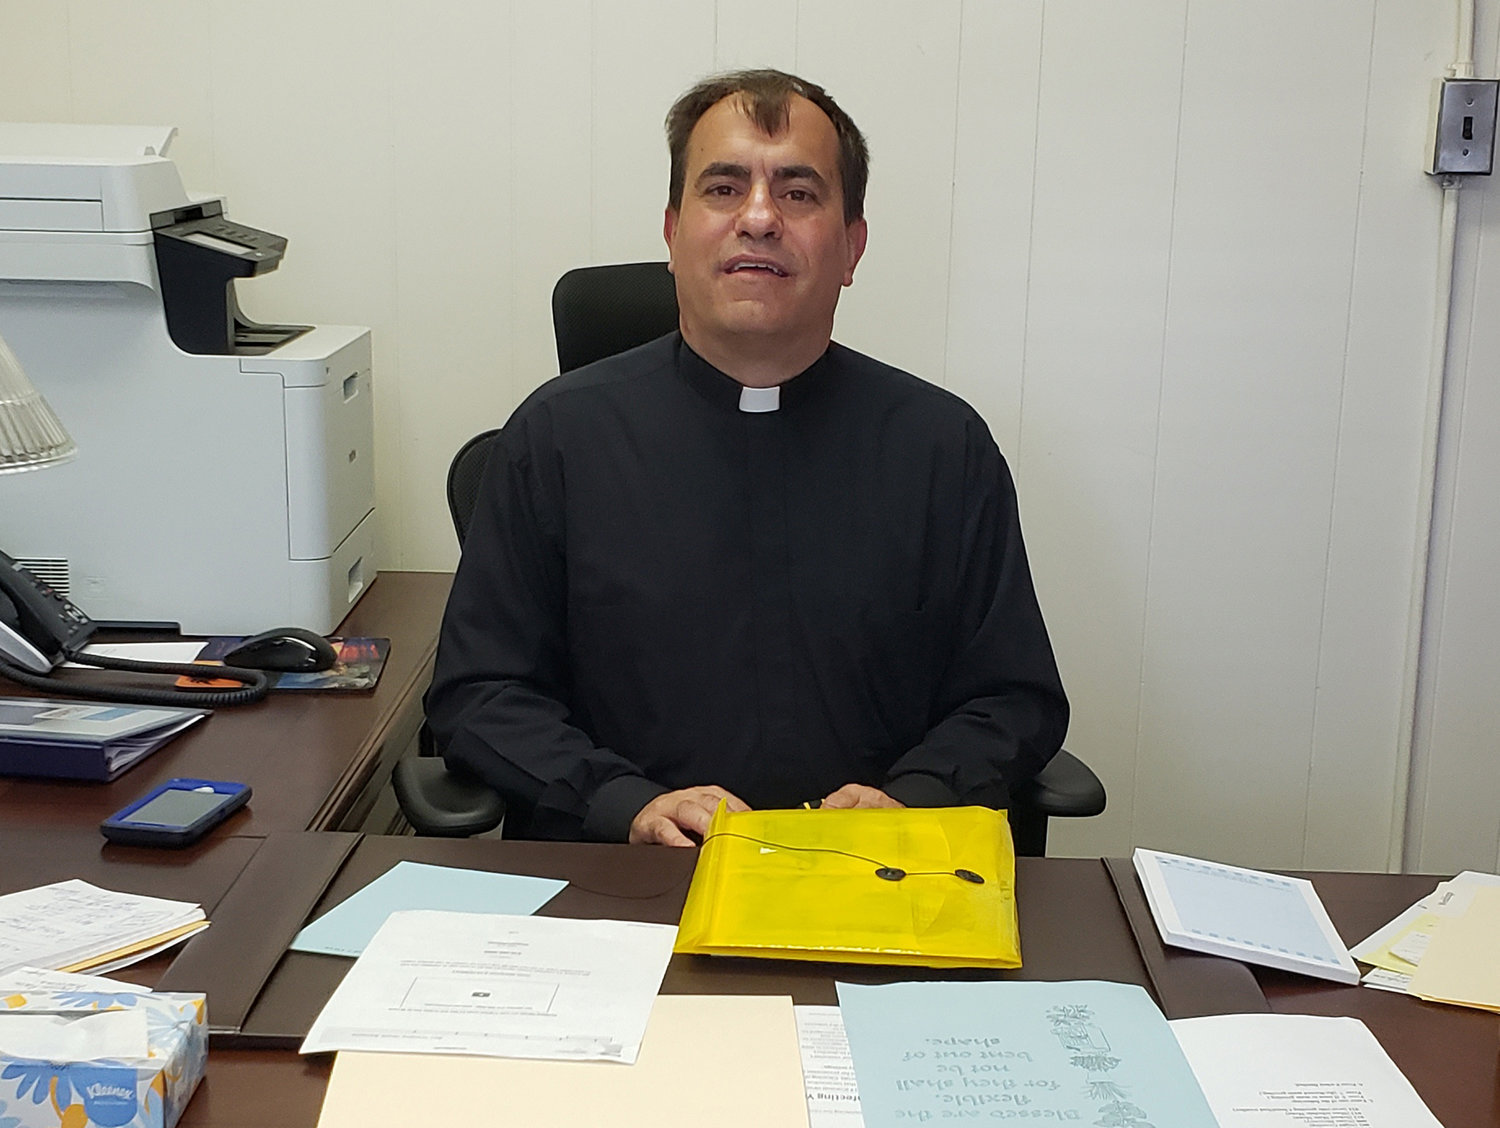 The Rev. James Stachacz, 52, began his tenure at Our Lady of Lourdes Church, in Malverne, on Aug. 26.